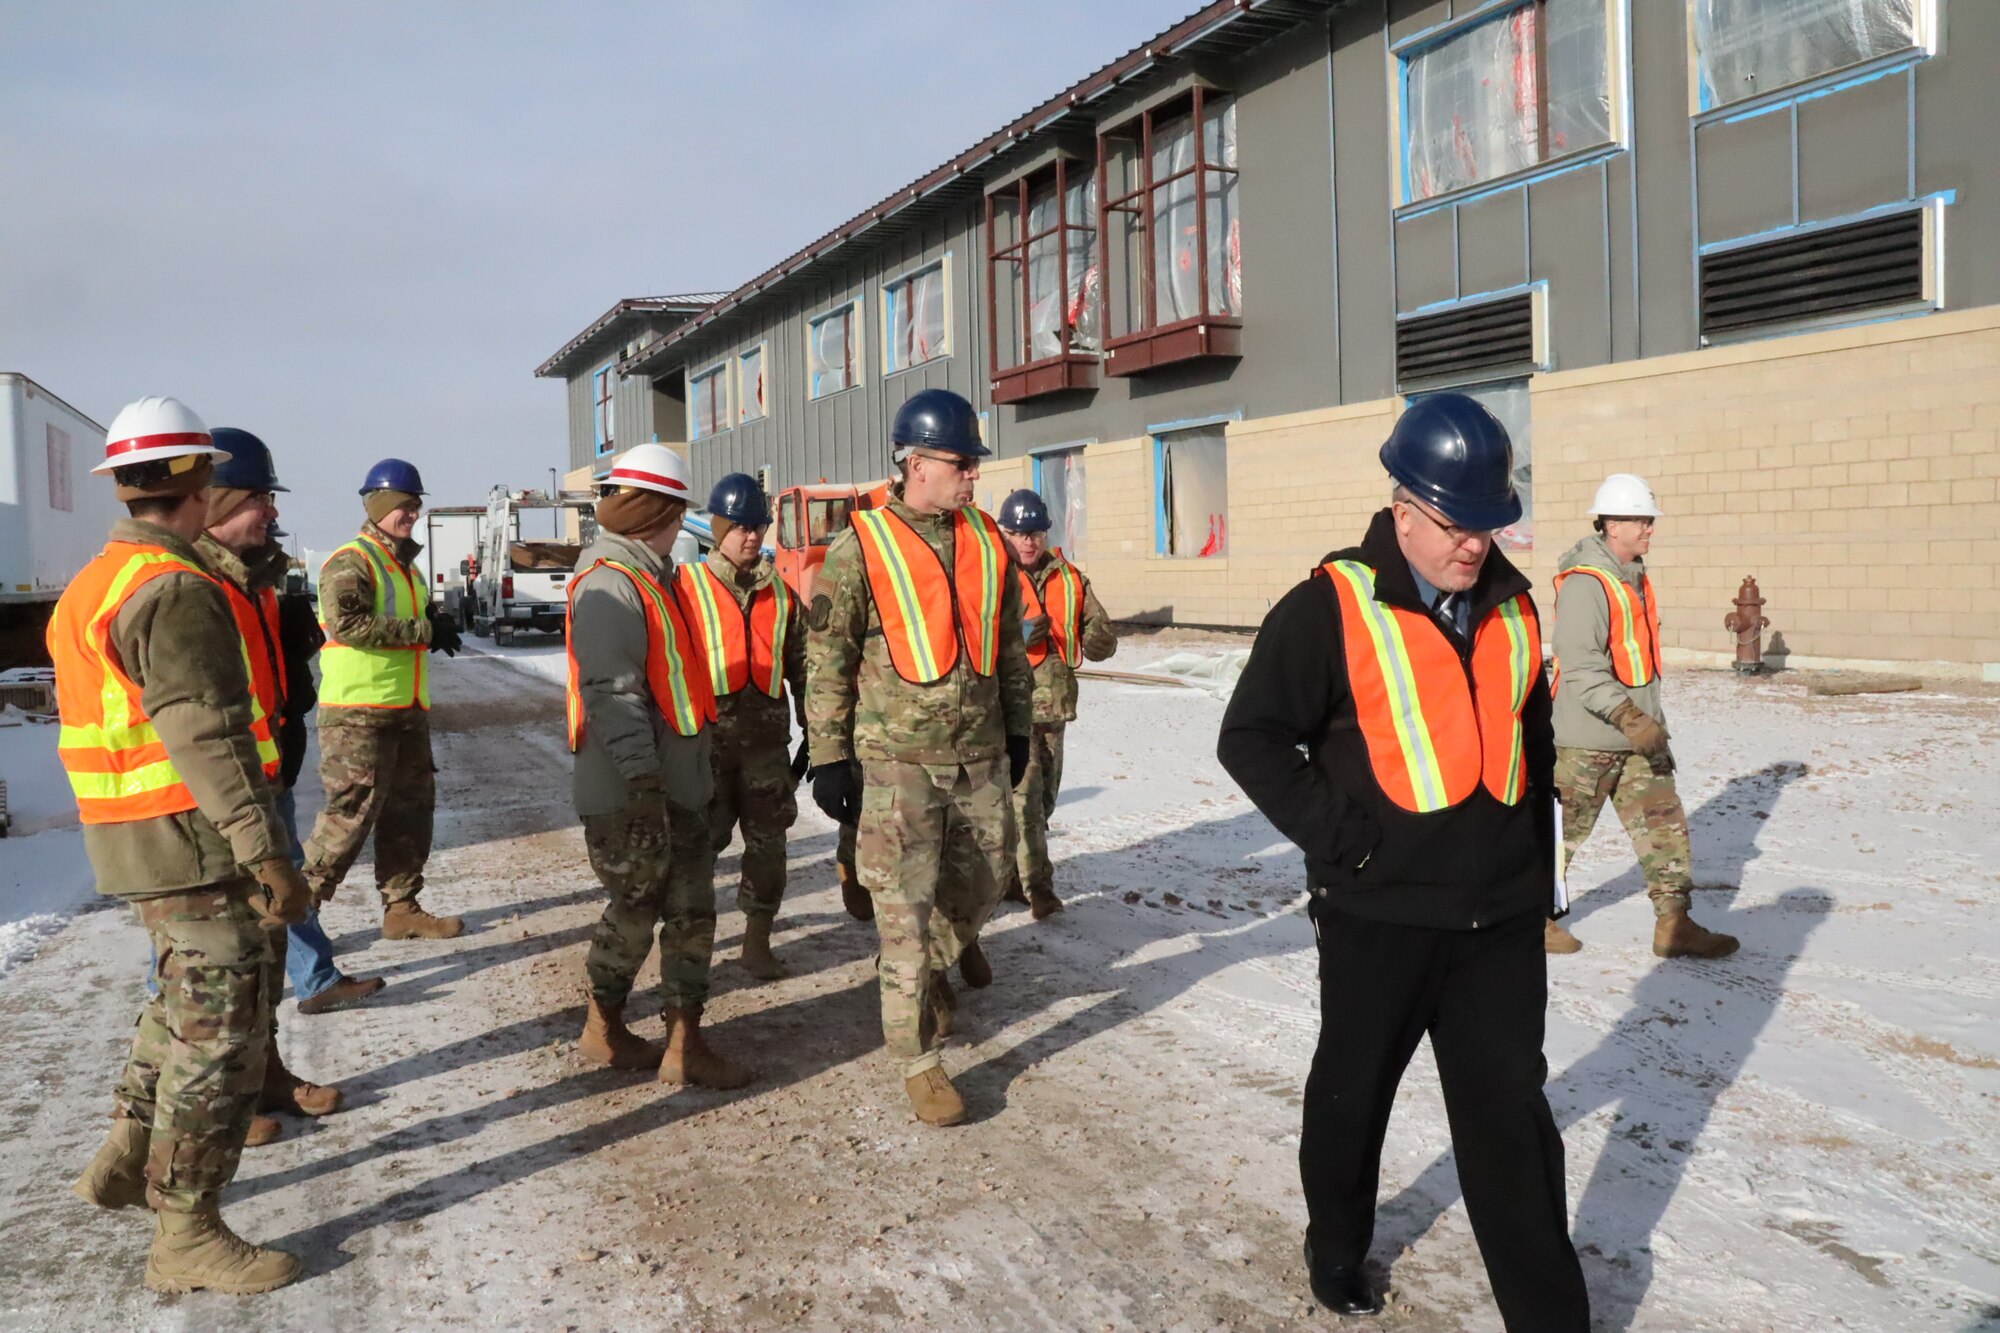 20th Air Force, Air Force Global Strike Command and 341st Missile Wing leadership tour the newest facility on Malmstrom Air Force Base.